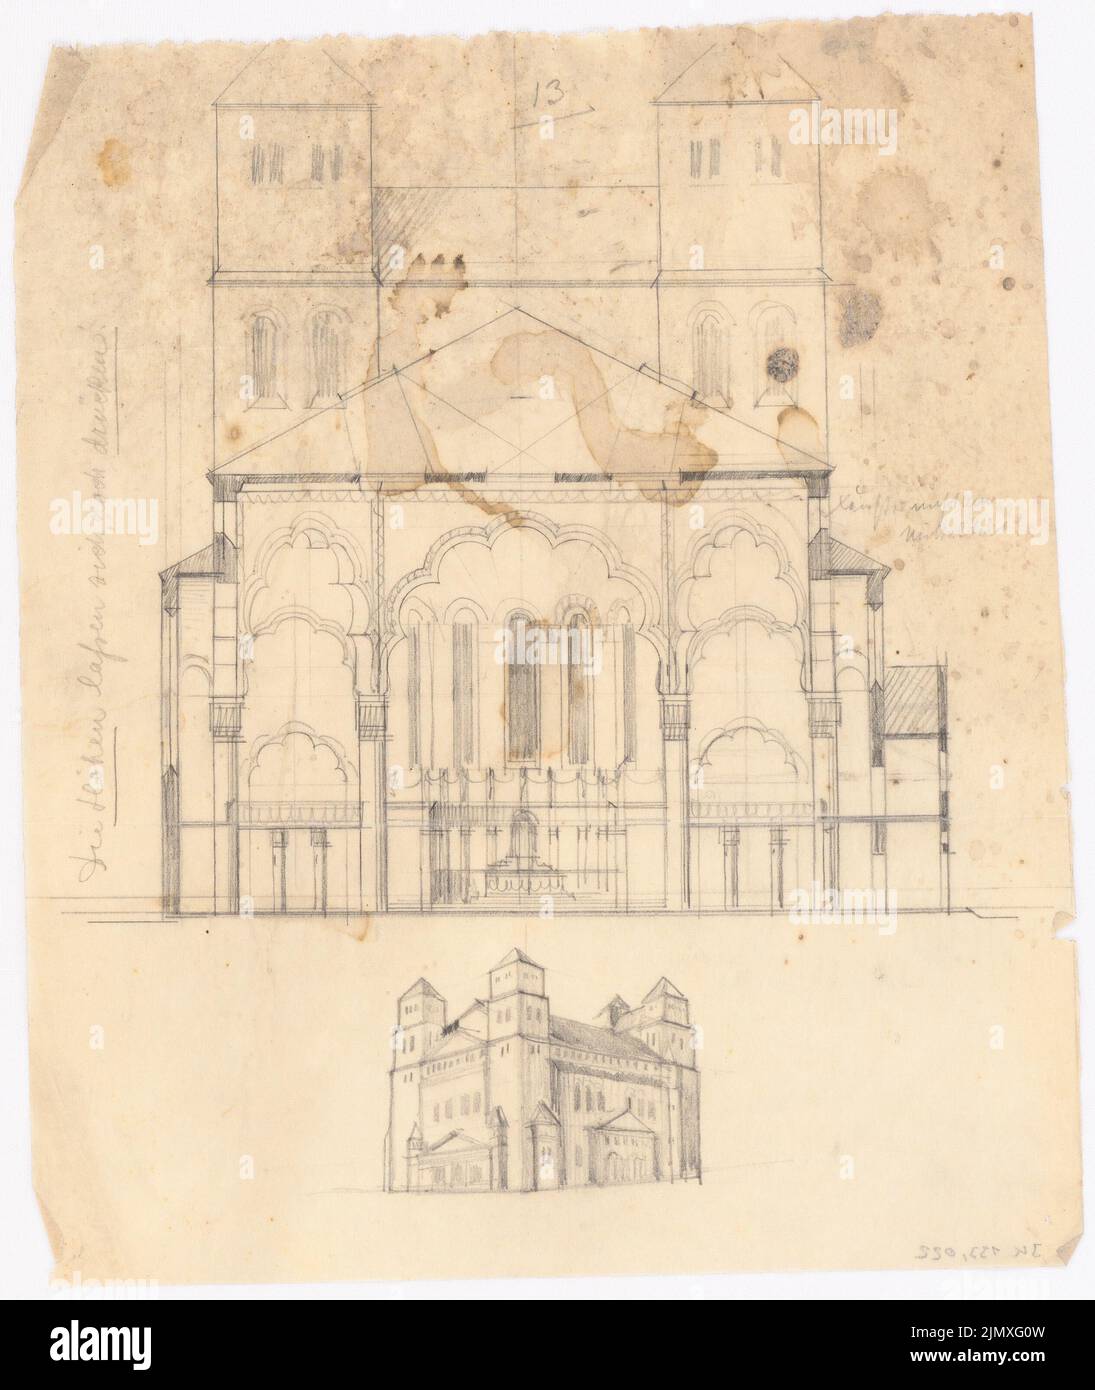 Klomp Johannes Franziskus (1865-1946), church (designs by Heinrich Grabbe for Klomp?) (1922-1922): cross section 1: 200 and perspective view (sheet 13). Pencil on transparent, 30.7 x 25.9 cm (including scan edges) Klomp Johannes Franziskus  (1865-1946): Kirche (Entwürfe von Heinrich Grabbe für Klomp?) Stock Photo